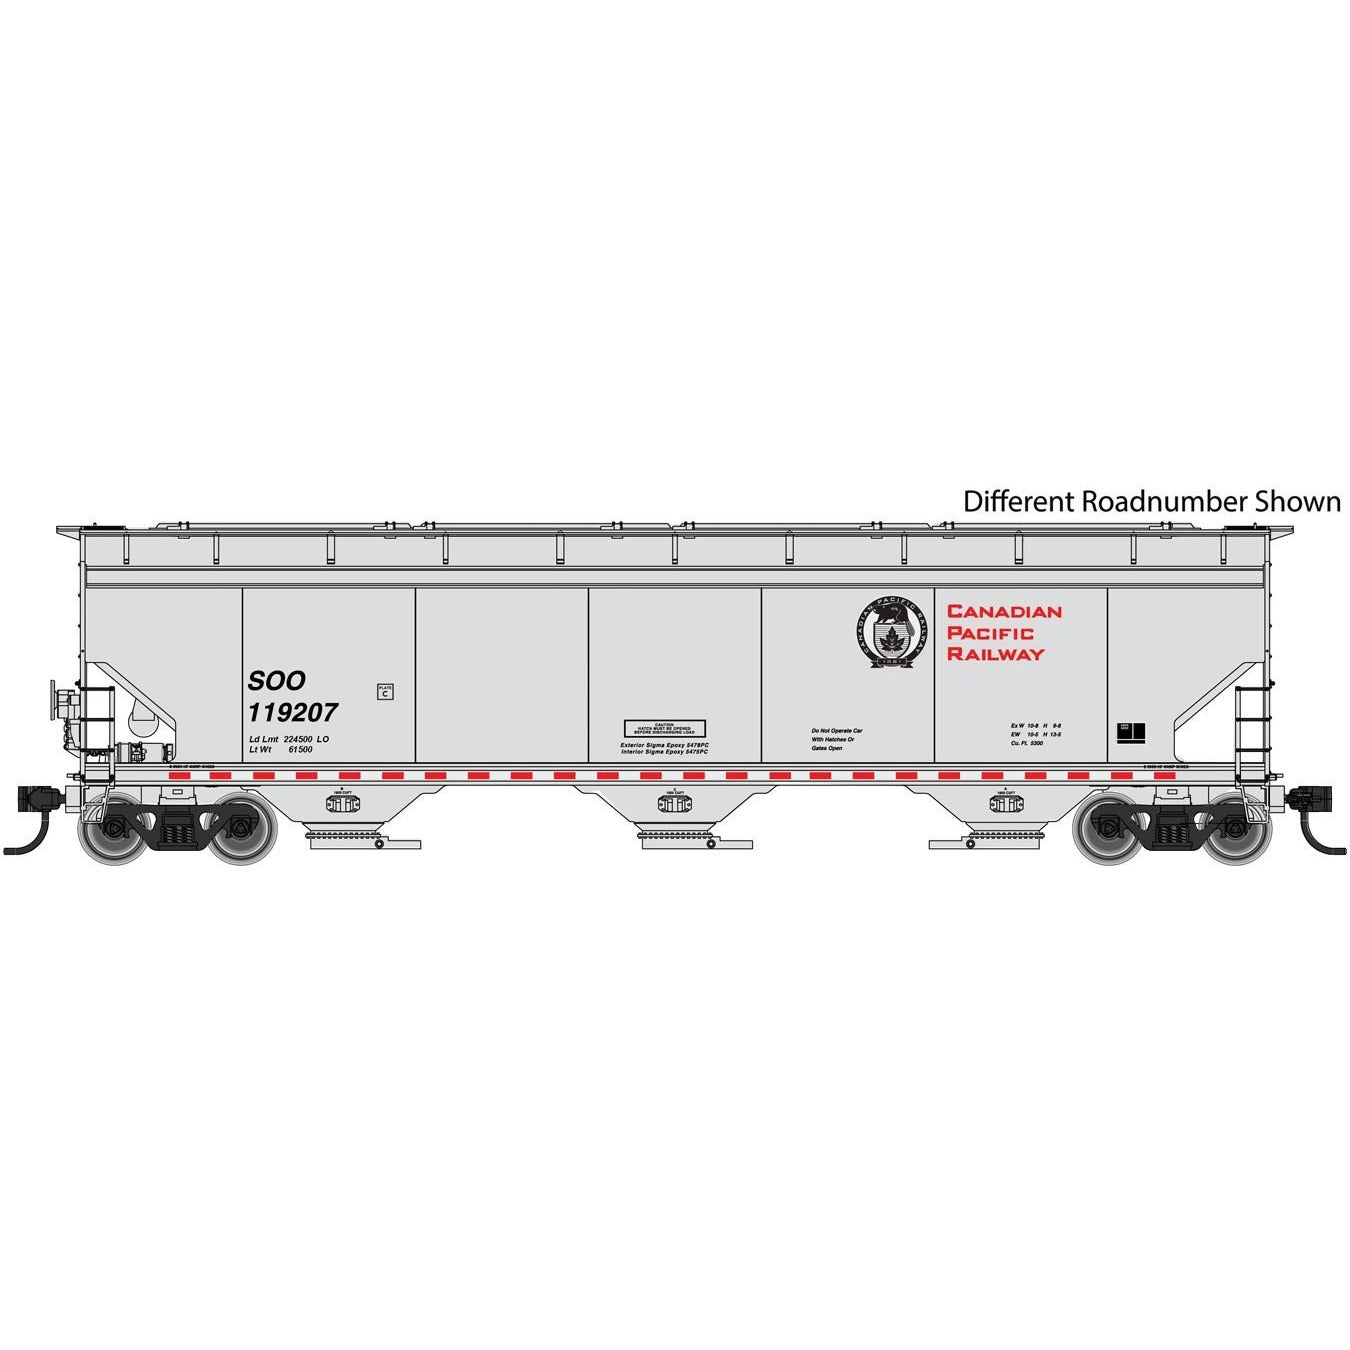 60' NSC 5150 3-Bay Covered Hopper - Ready to Run -- Canadian Pacific SOO #119264 (gray, red, black, Beaver Logo)